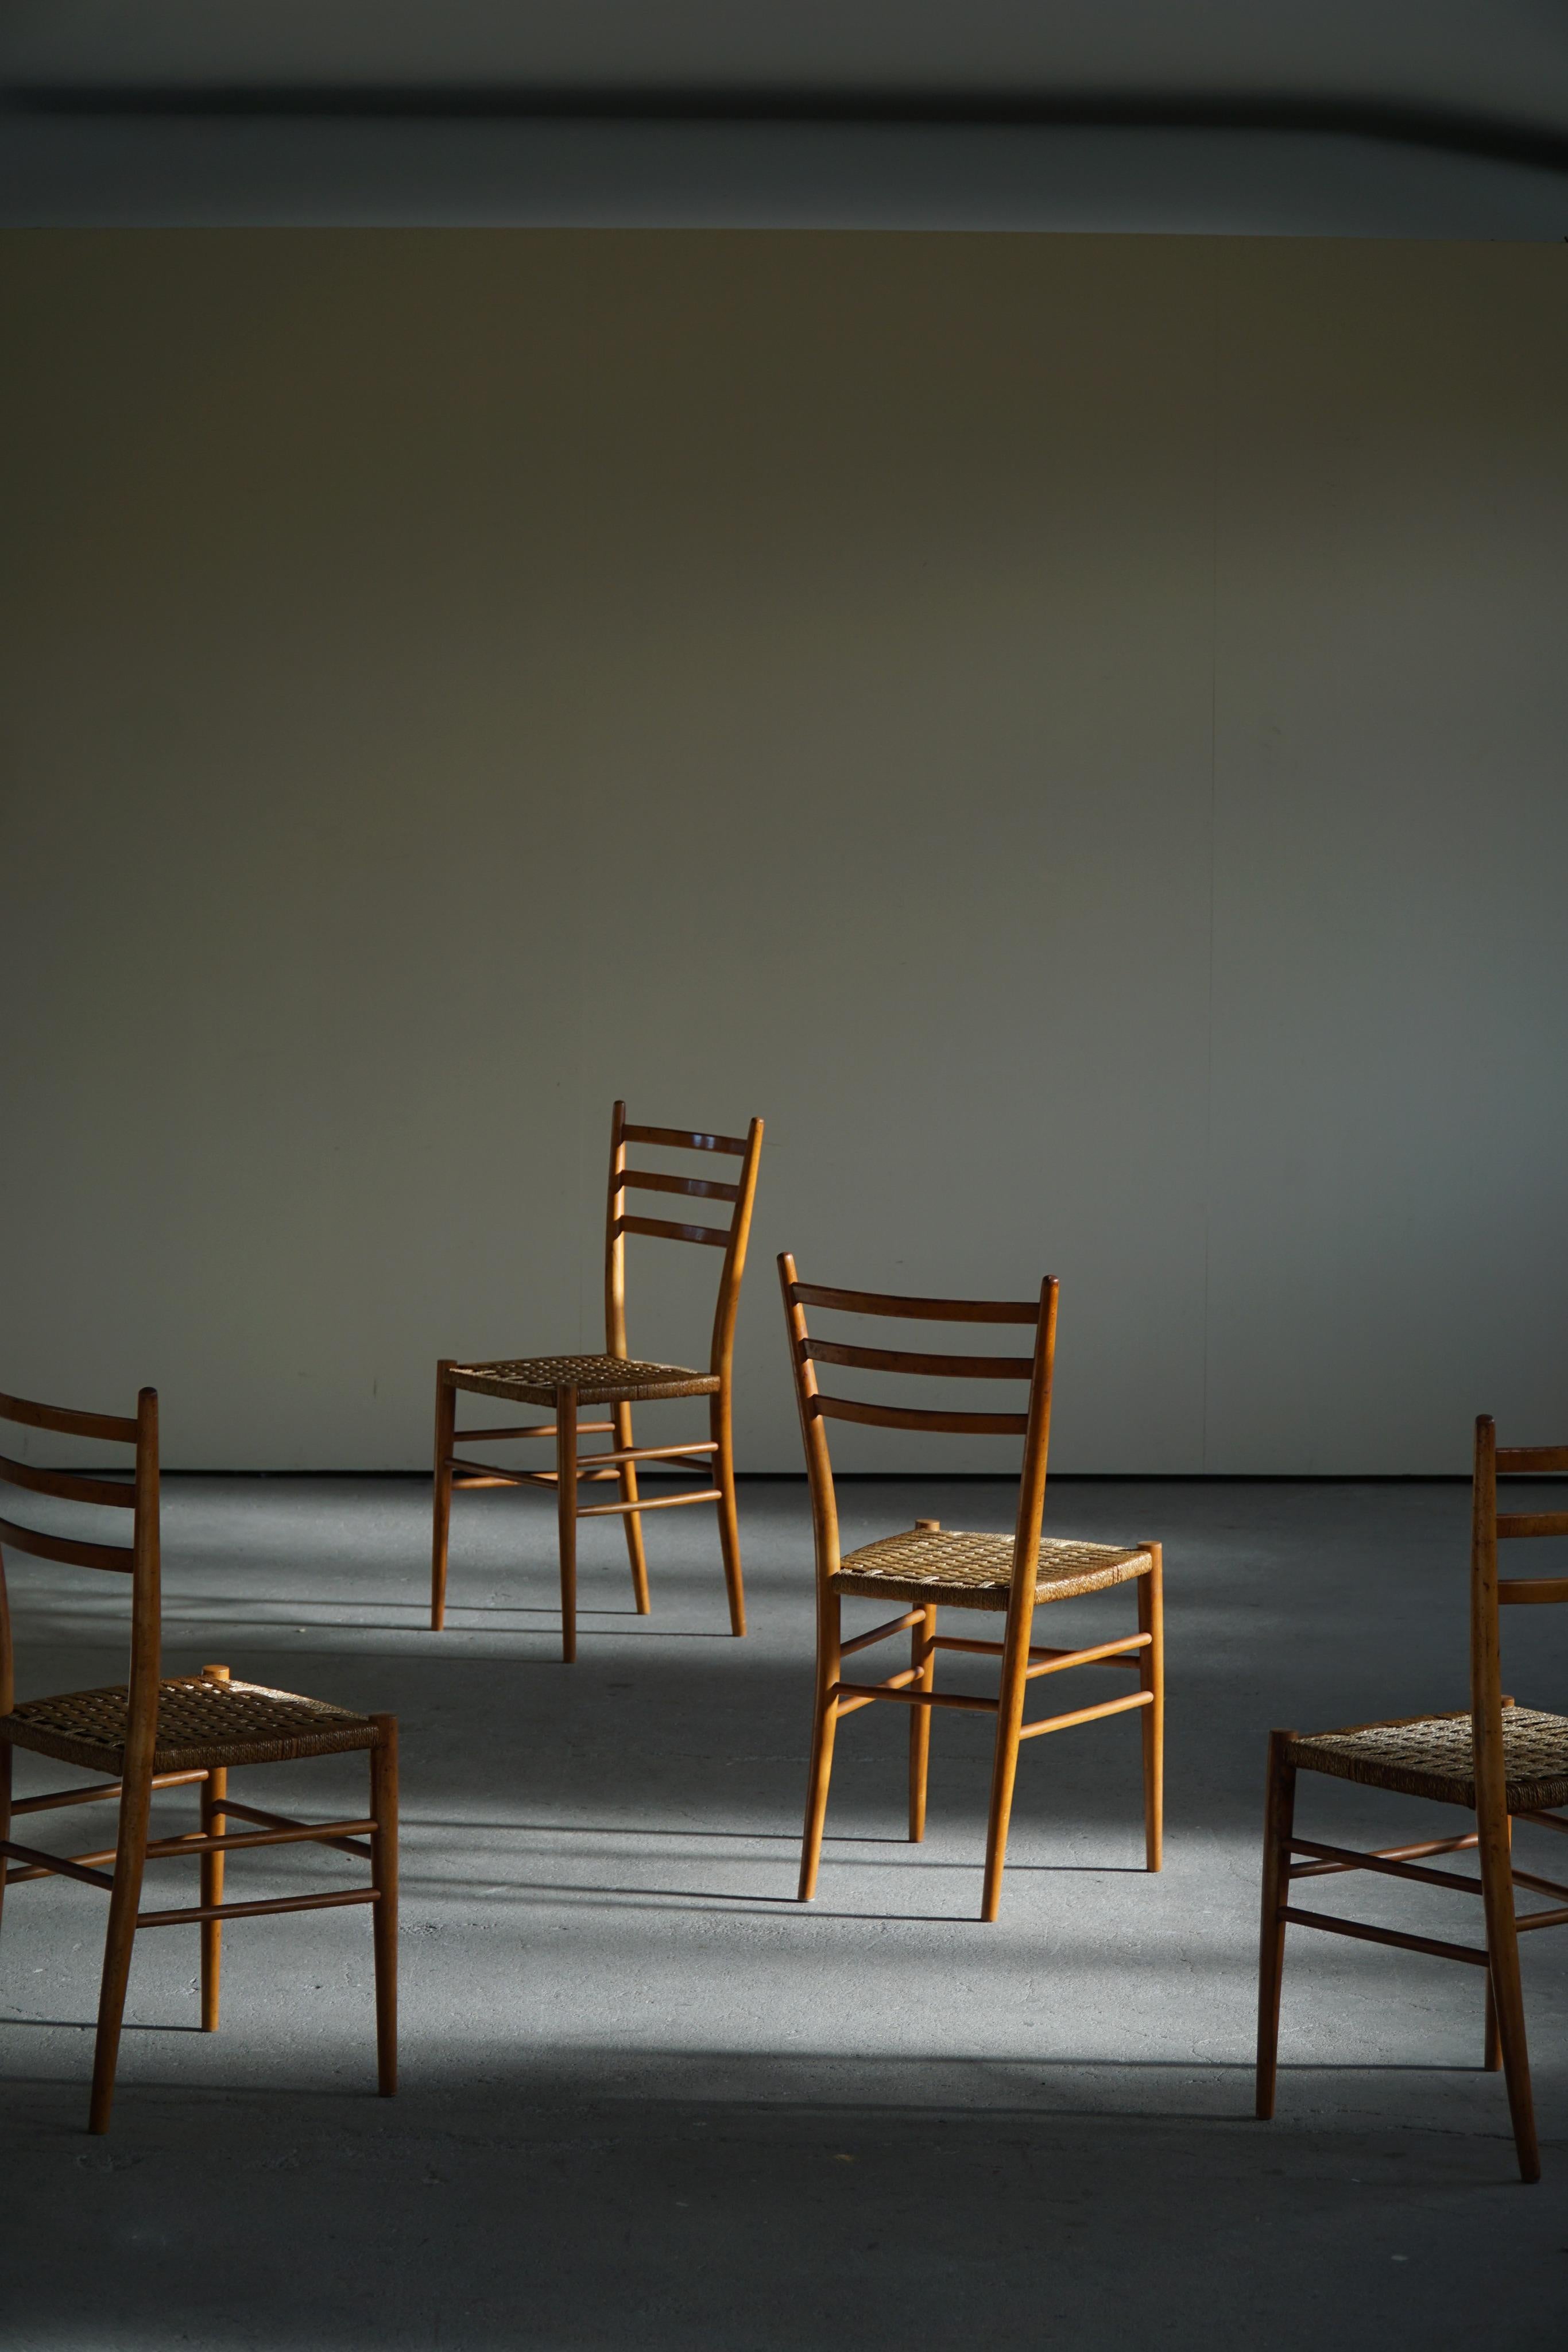 A classic set of 4 minimalistic dining chairs made in solid beech and wicker. Made in the manner of Gio Ponti in the 1960s. The wicker seats are nicely patinated, the wooden frame with traces of wear.

These Italian vintage chairs will complement